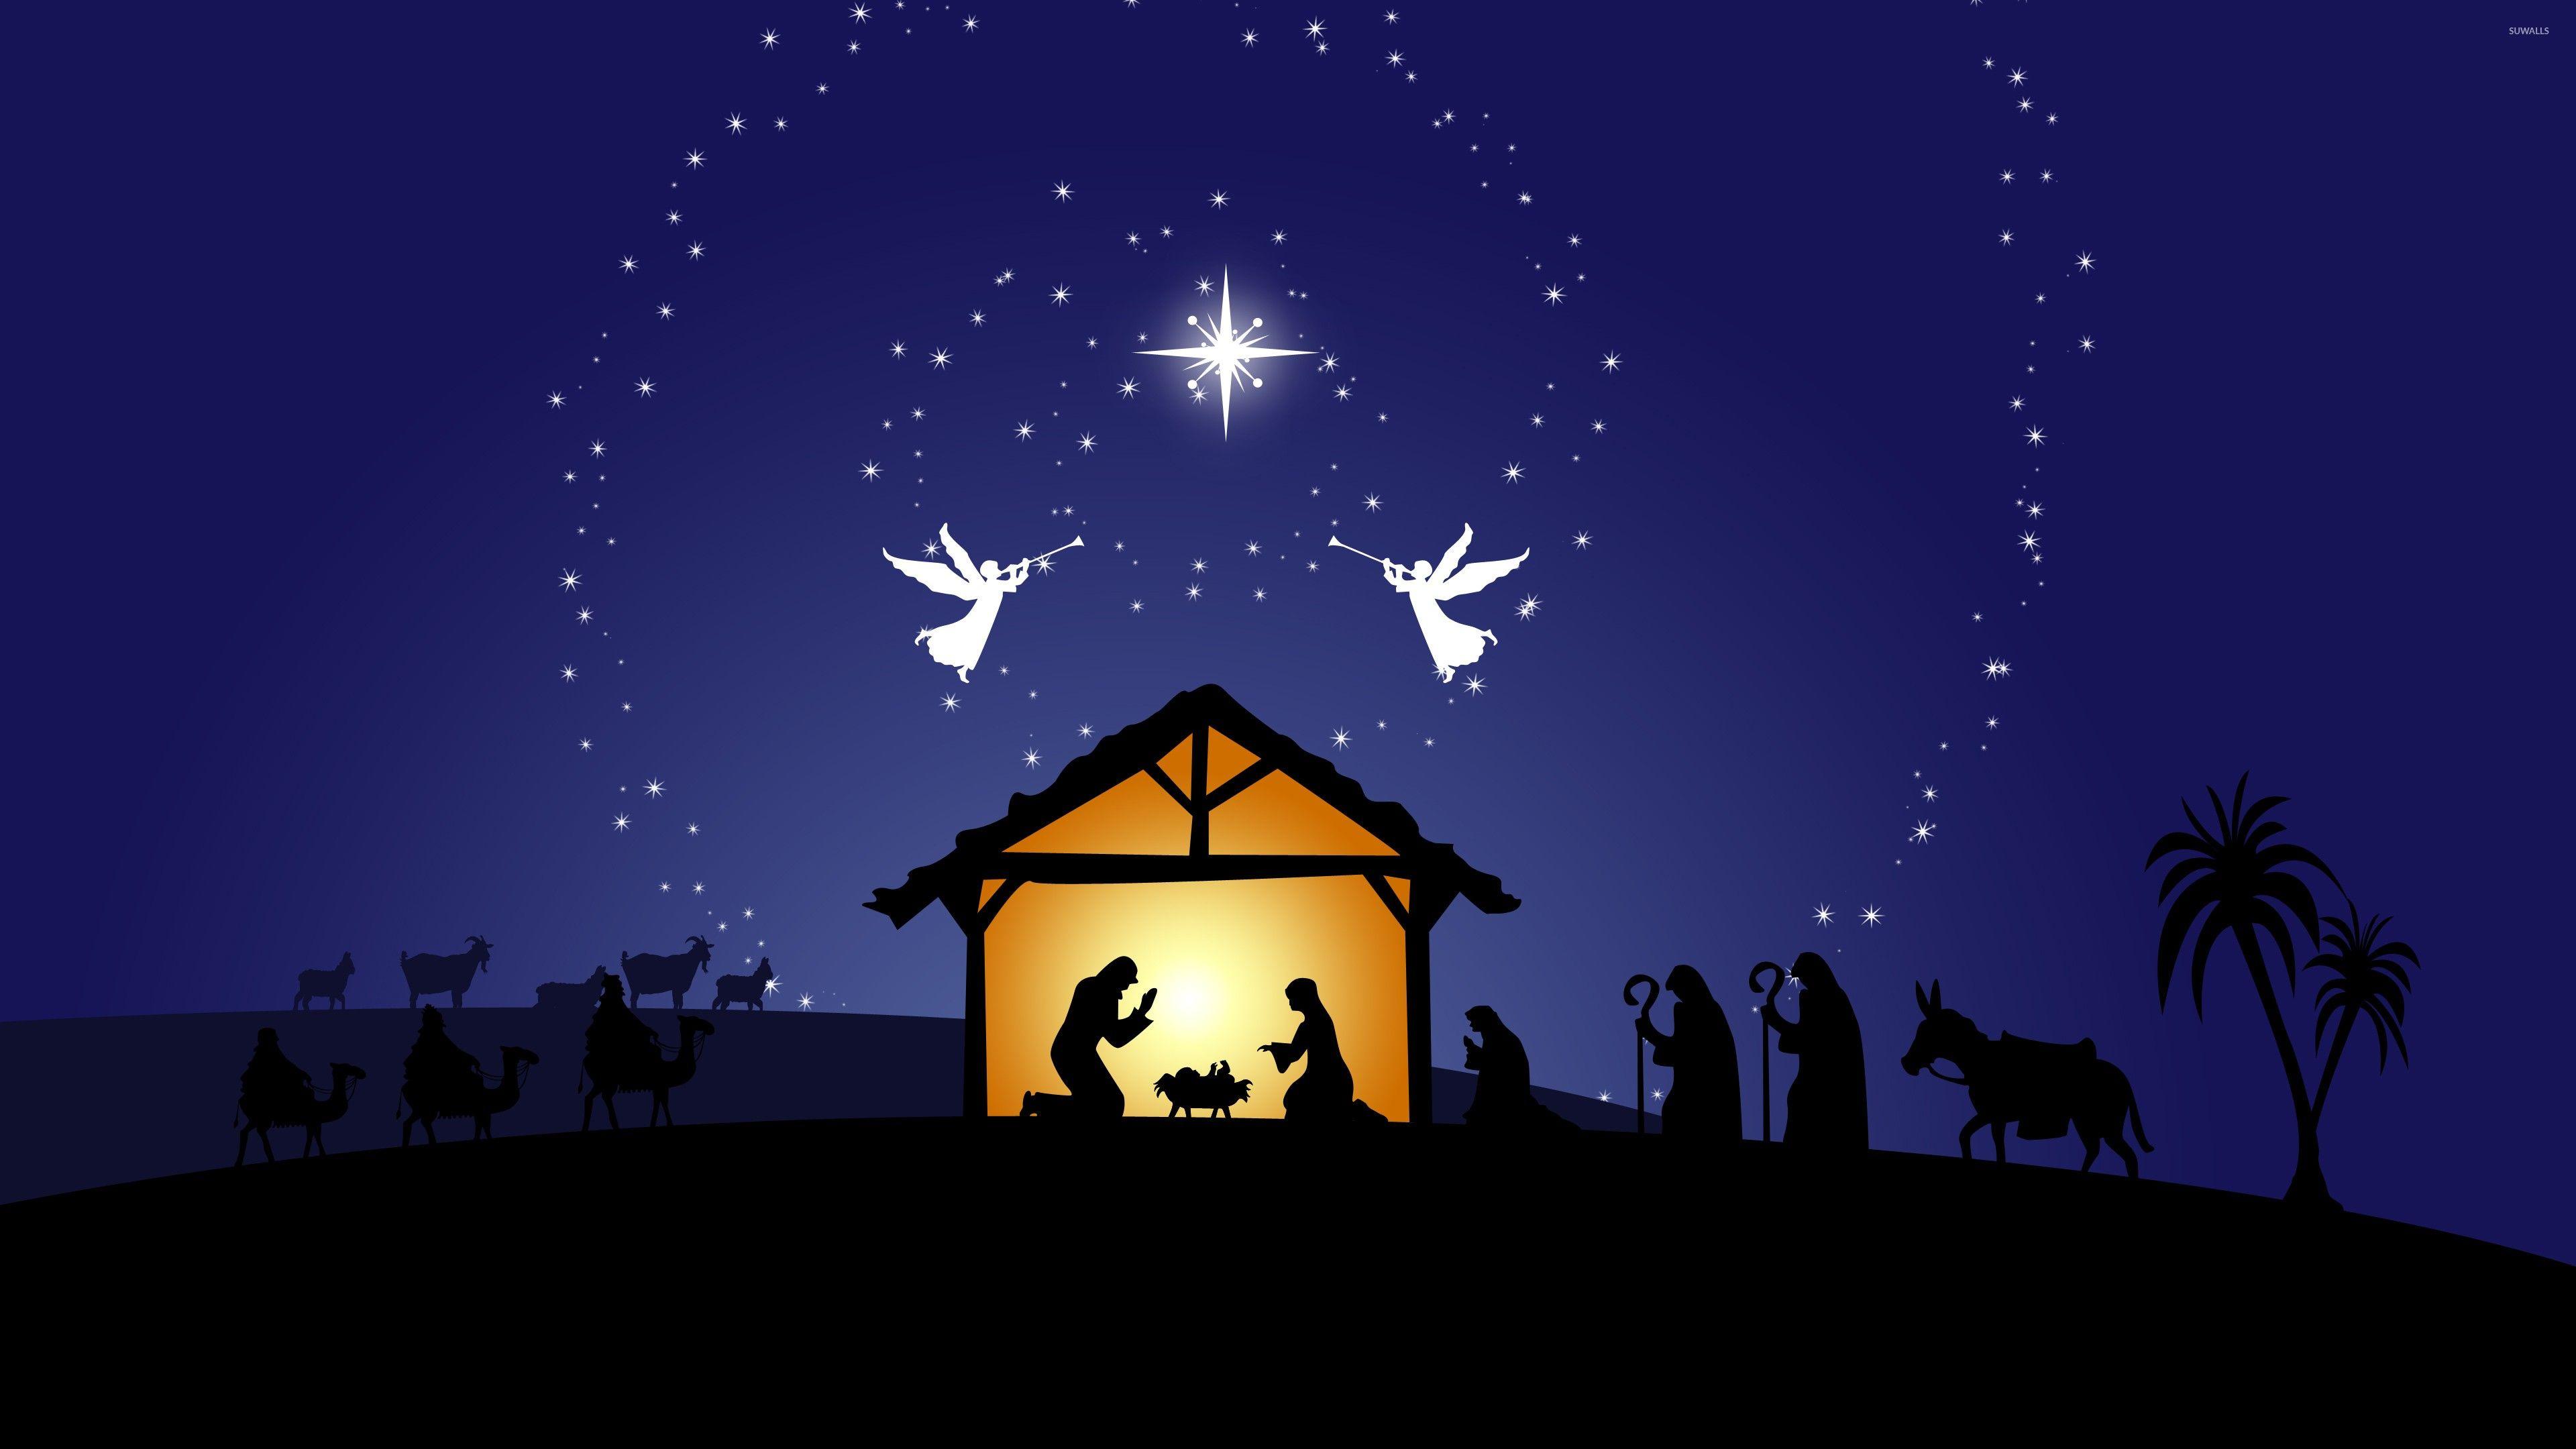 Christmas Manger Wallpapers - Top Free Christmas Manger Backgrounds ...